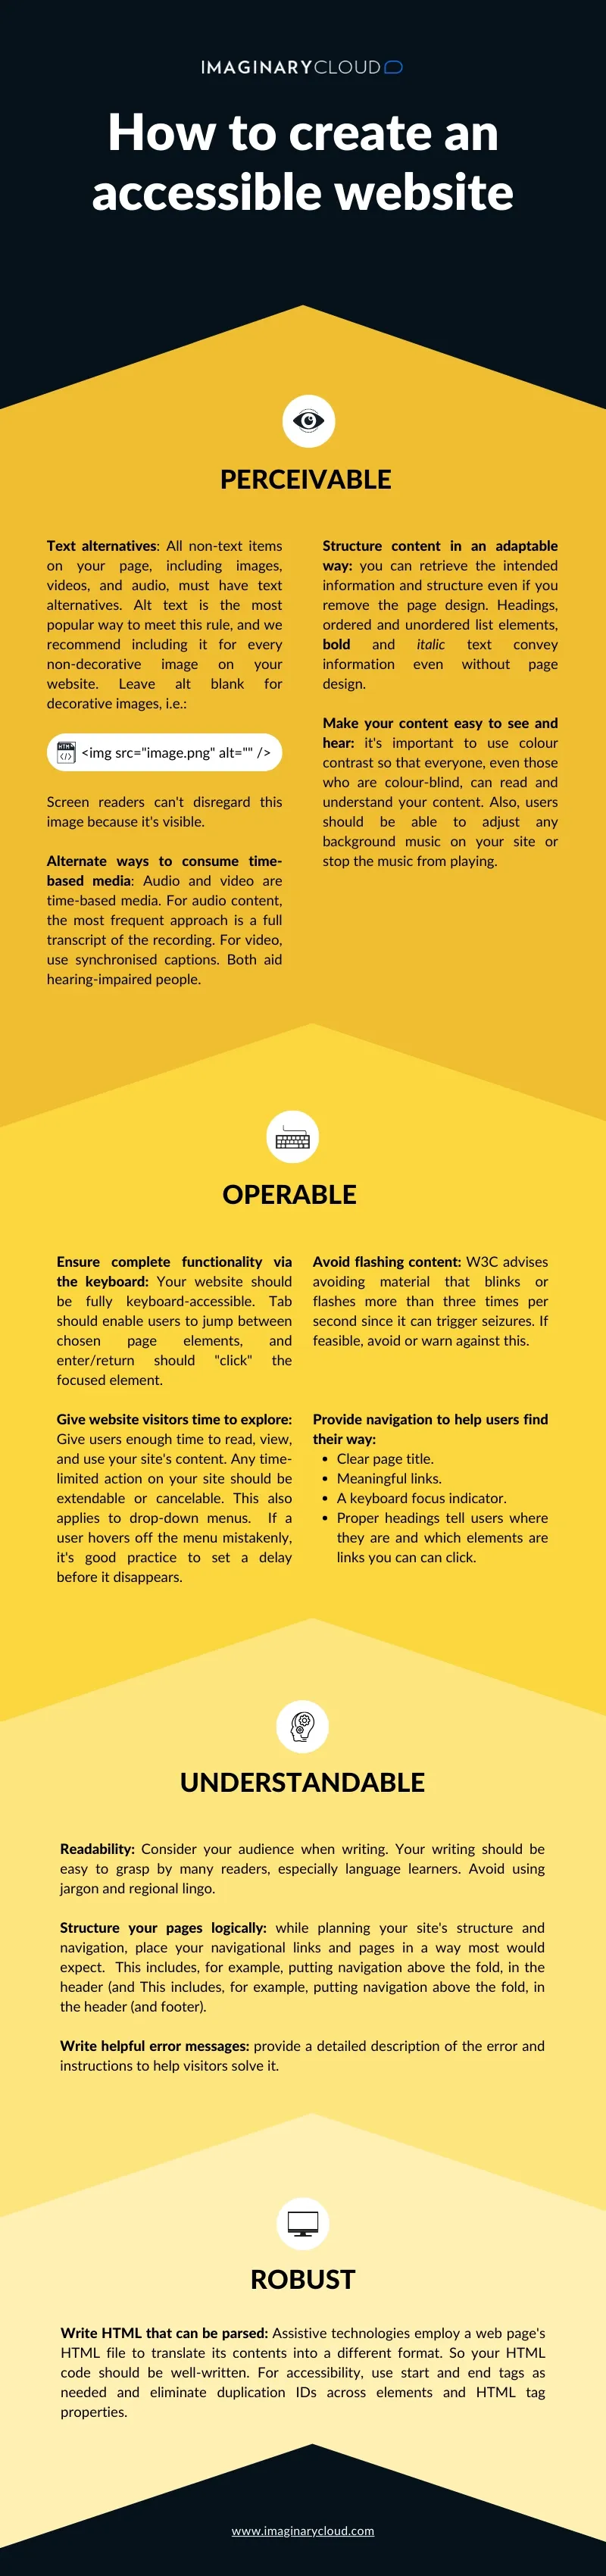 Infographic on how to create an accessible web.